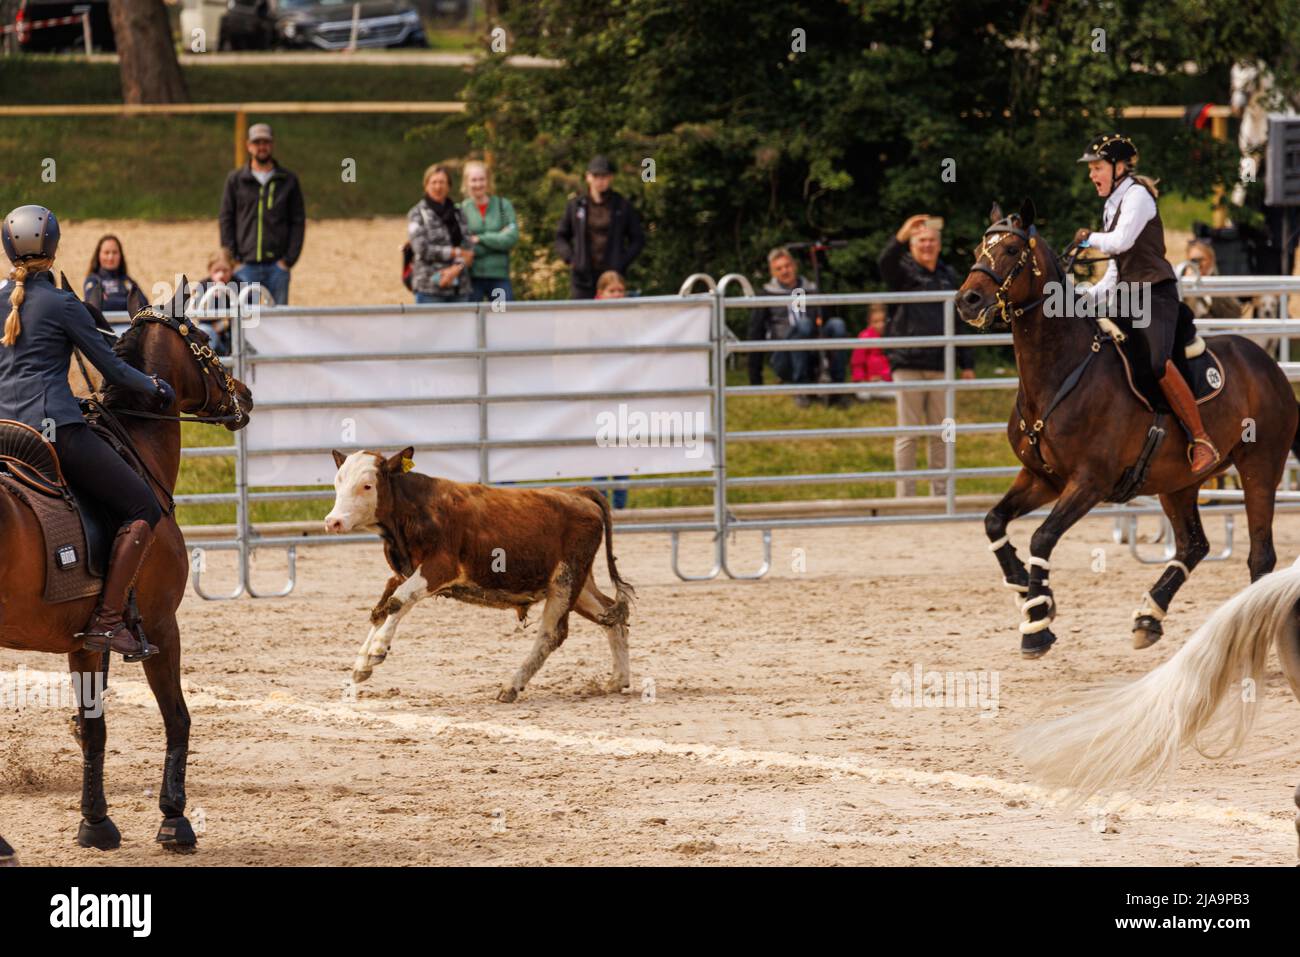 MUNICH, GERMANY - MAY 29: Working Equitation at Pferd International on May 29th, 2022 in Munich, Germany. Team cow cattle trial. Stock Photo